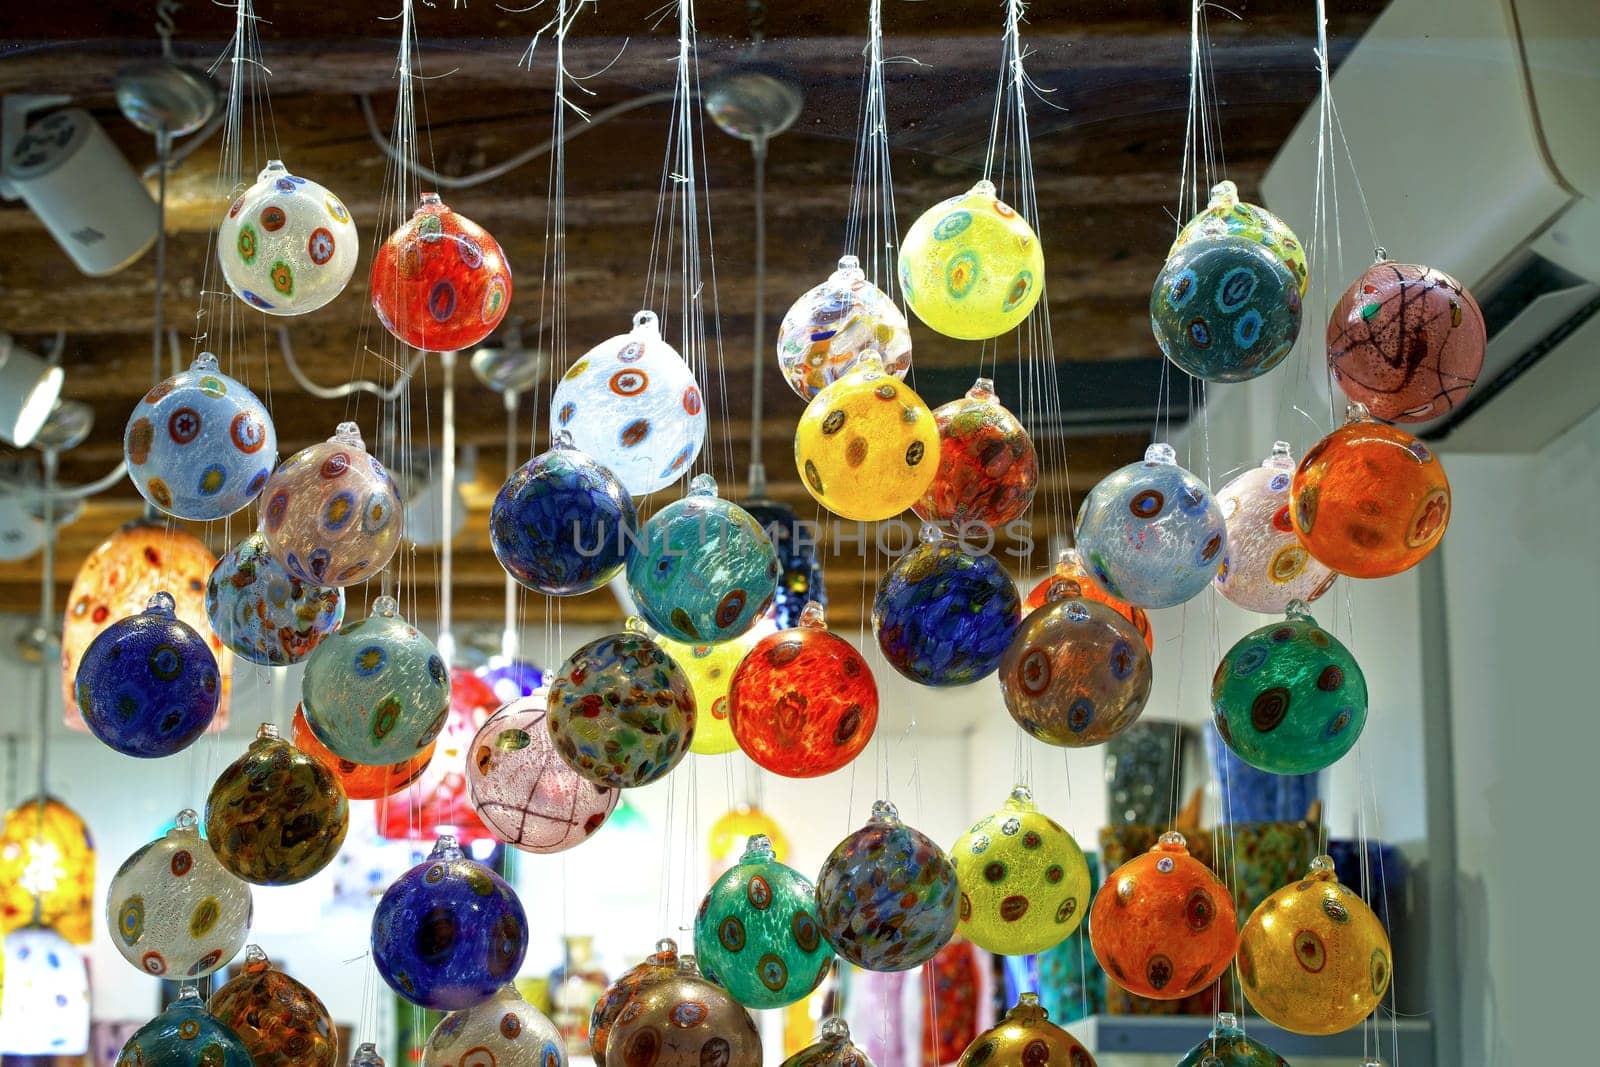 Coloured Glass Decorative Balloons In Shop Window In Venice Italy by aprilphoto